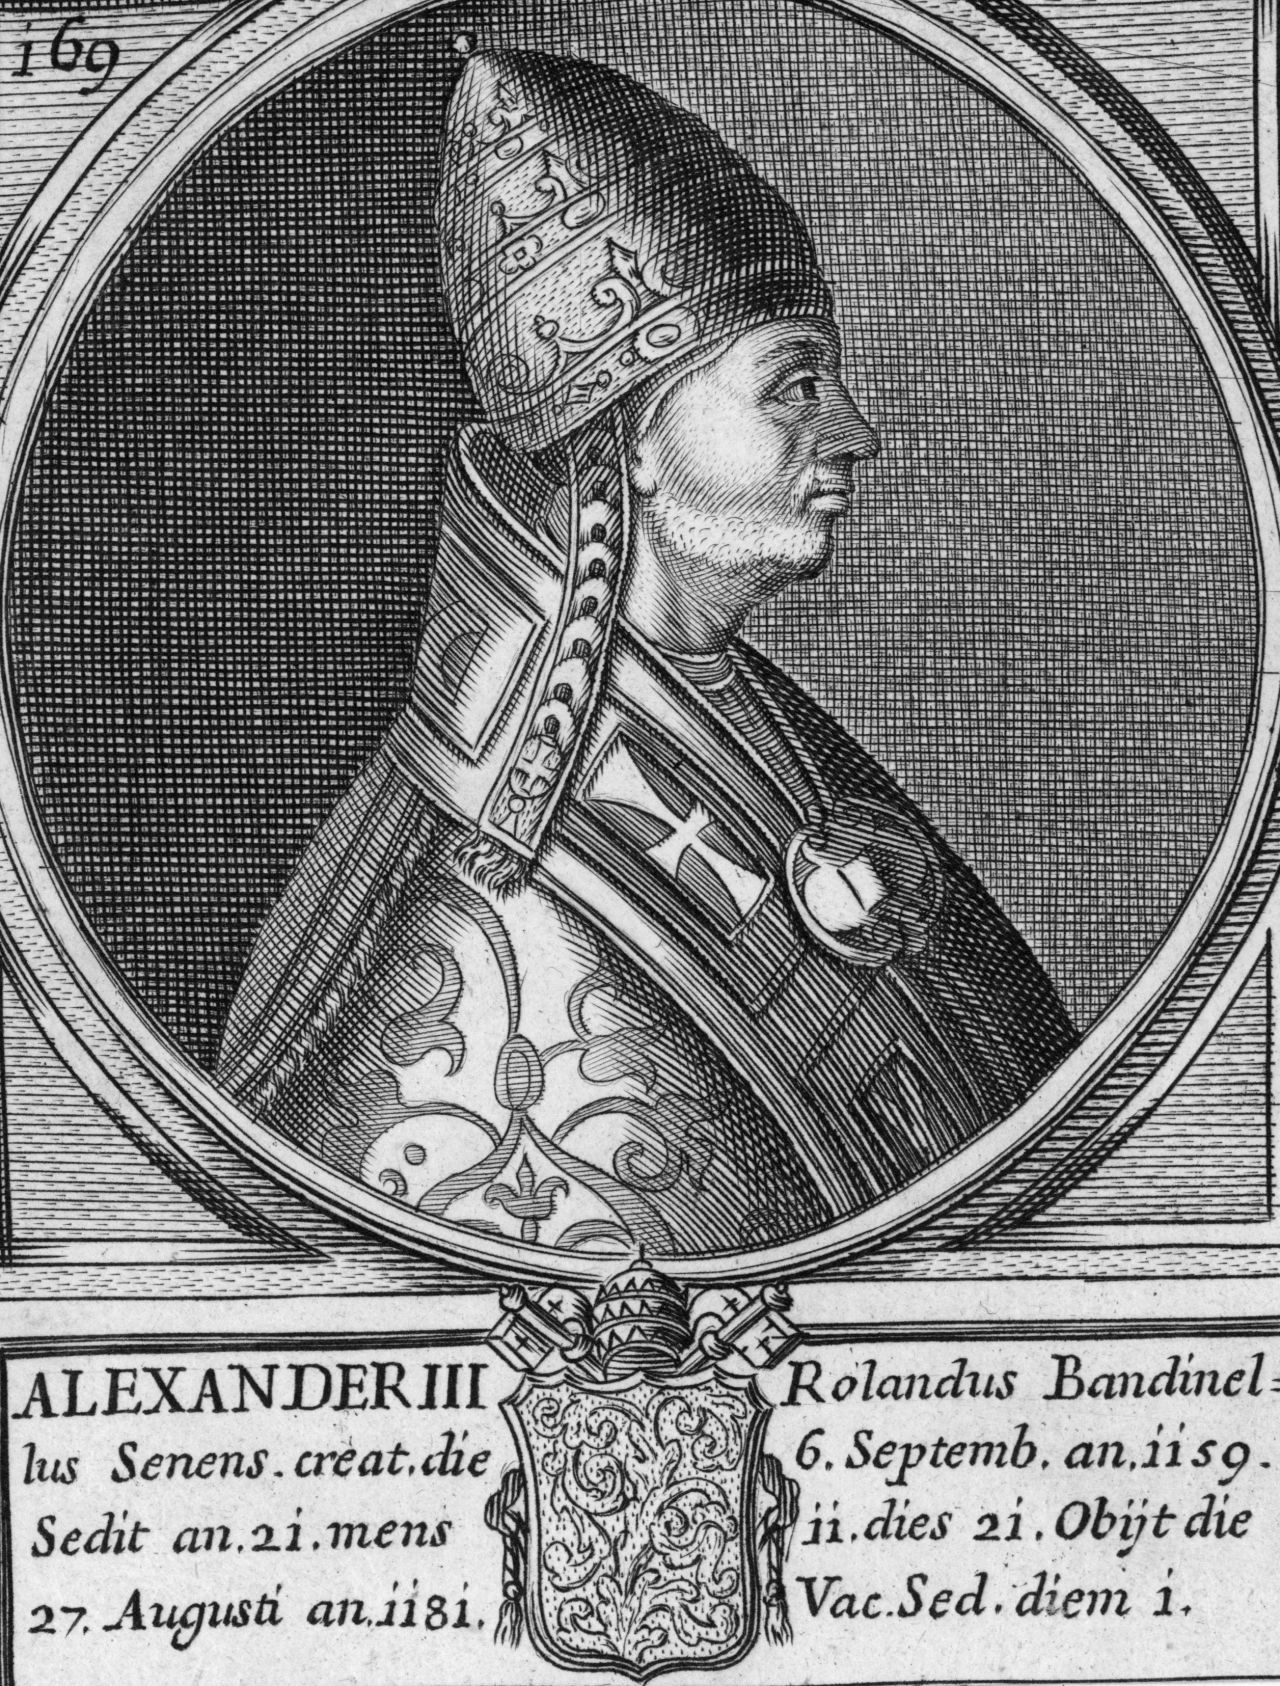 No. 7: Pope Alexander III reigned for 21 years, 11 months and 24 days.